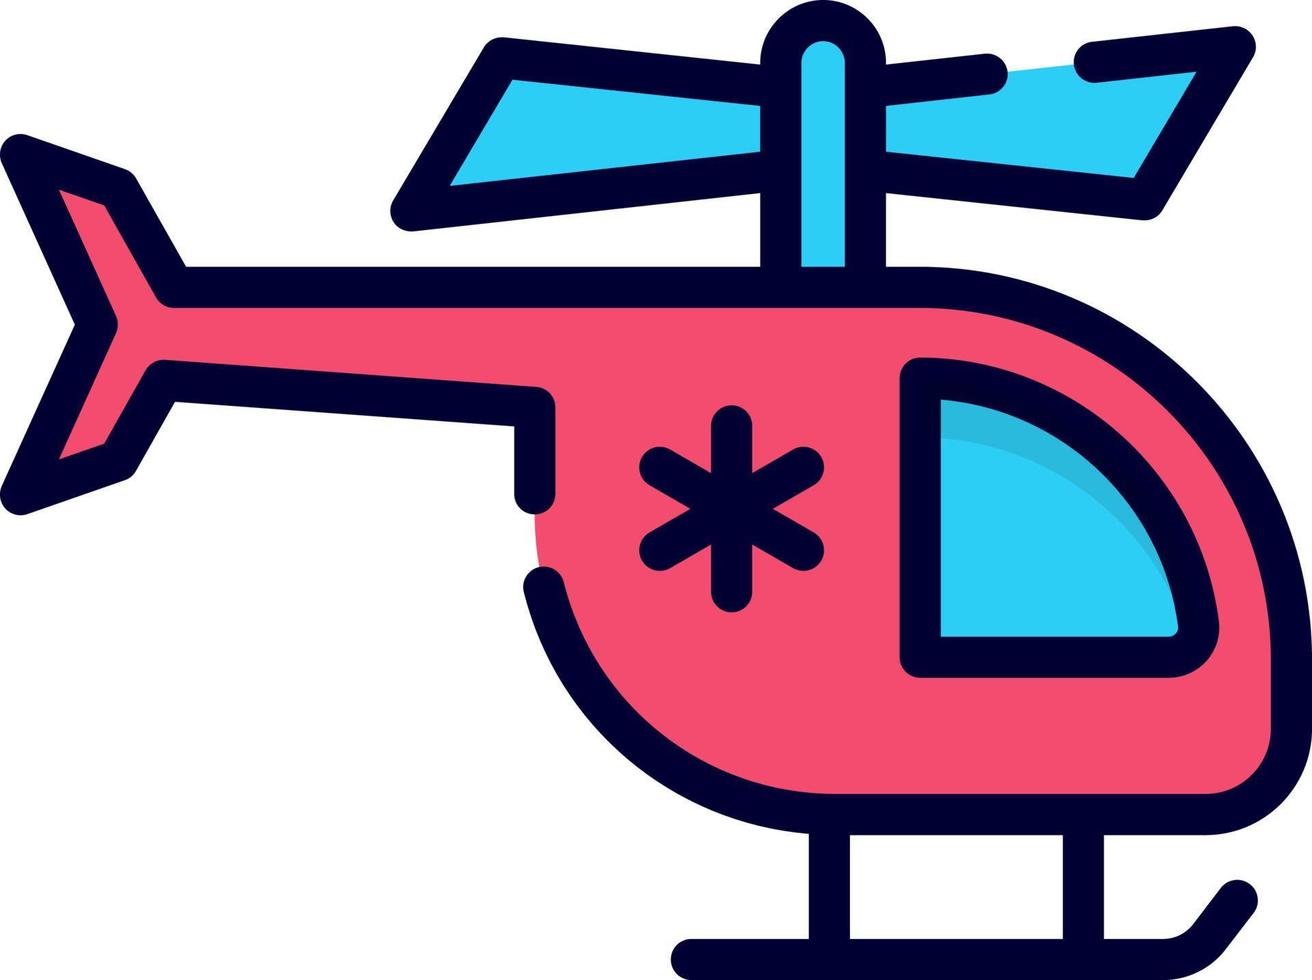 air ambulance, rescue icon, healthcare and medical icon. vector